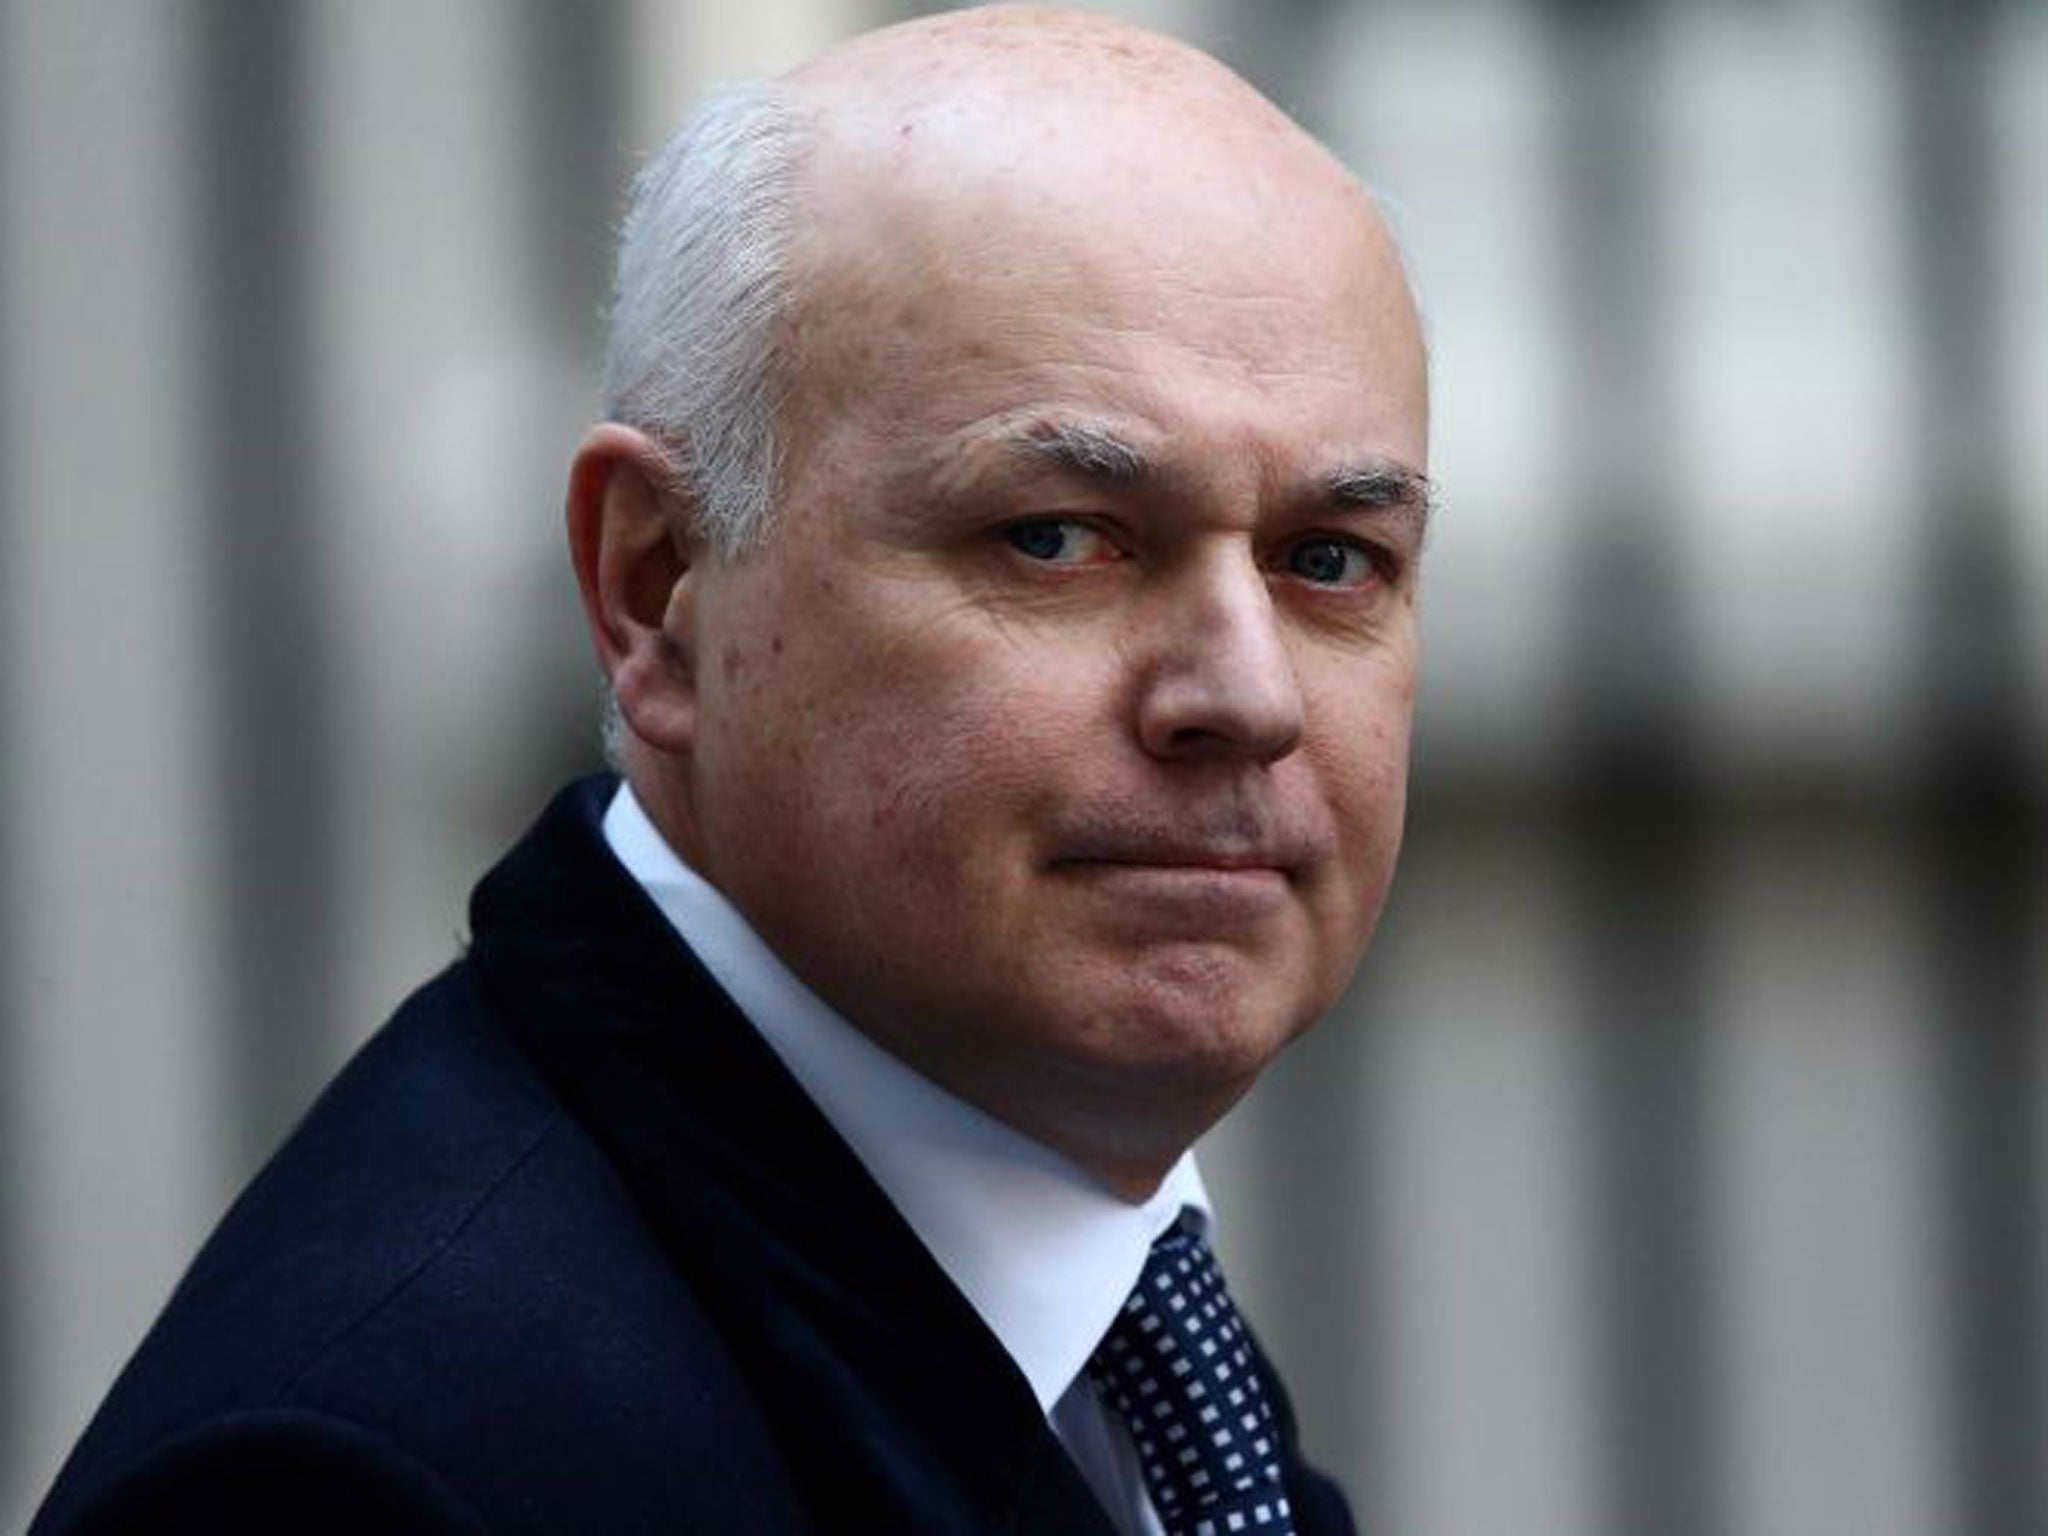 The new credit, which combines six working-age benefits and credits into a single payment, has been championed by Iain Duncan Smith, the Work and Pensions Secretary, as a way of ensuring the unemployed always have an incentive to find a job